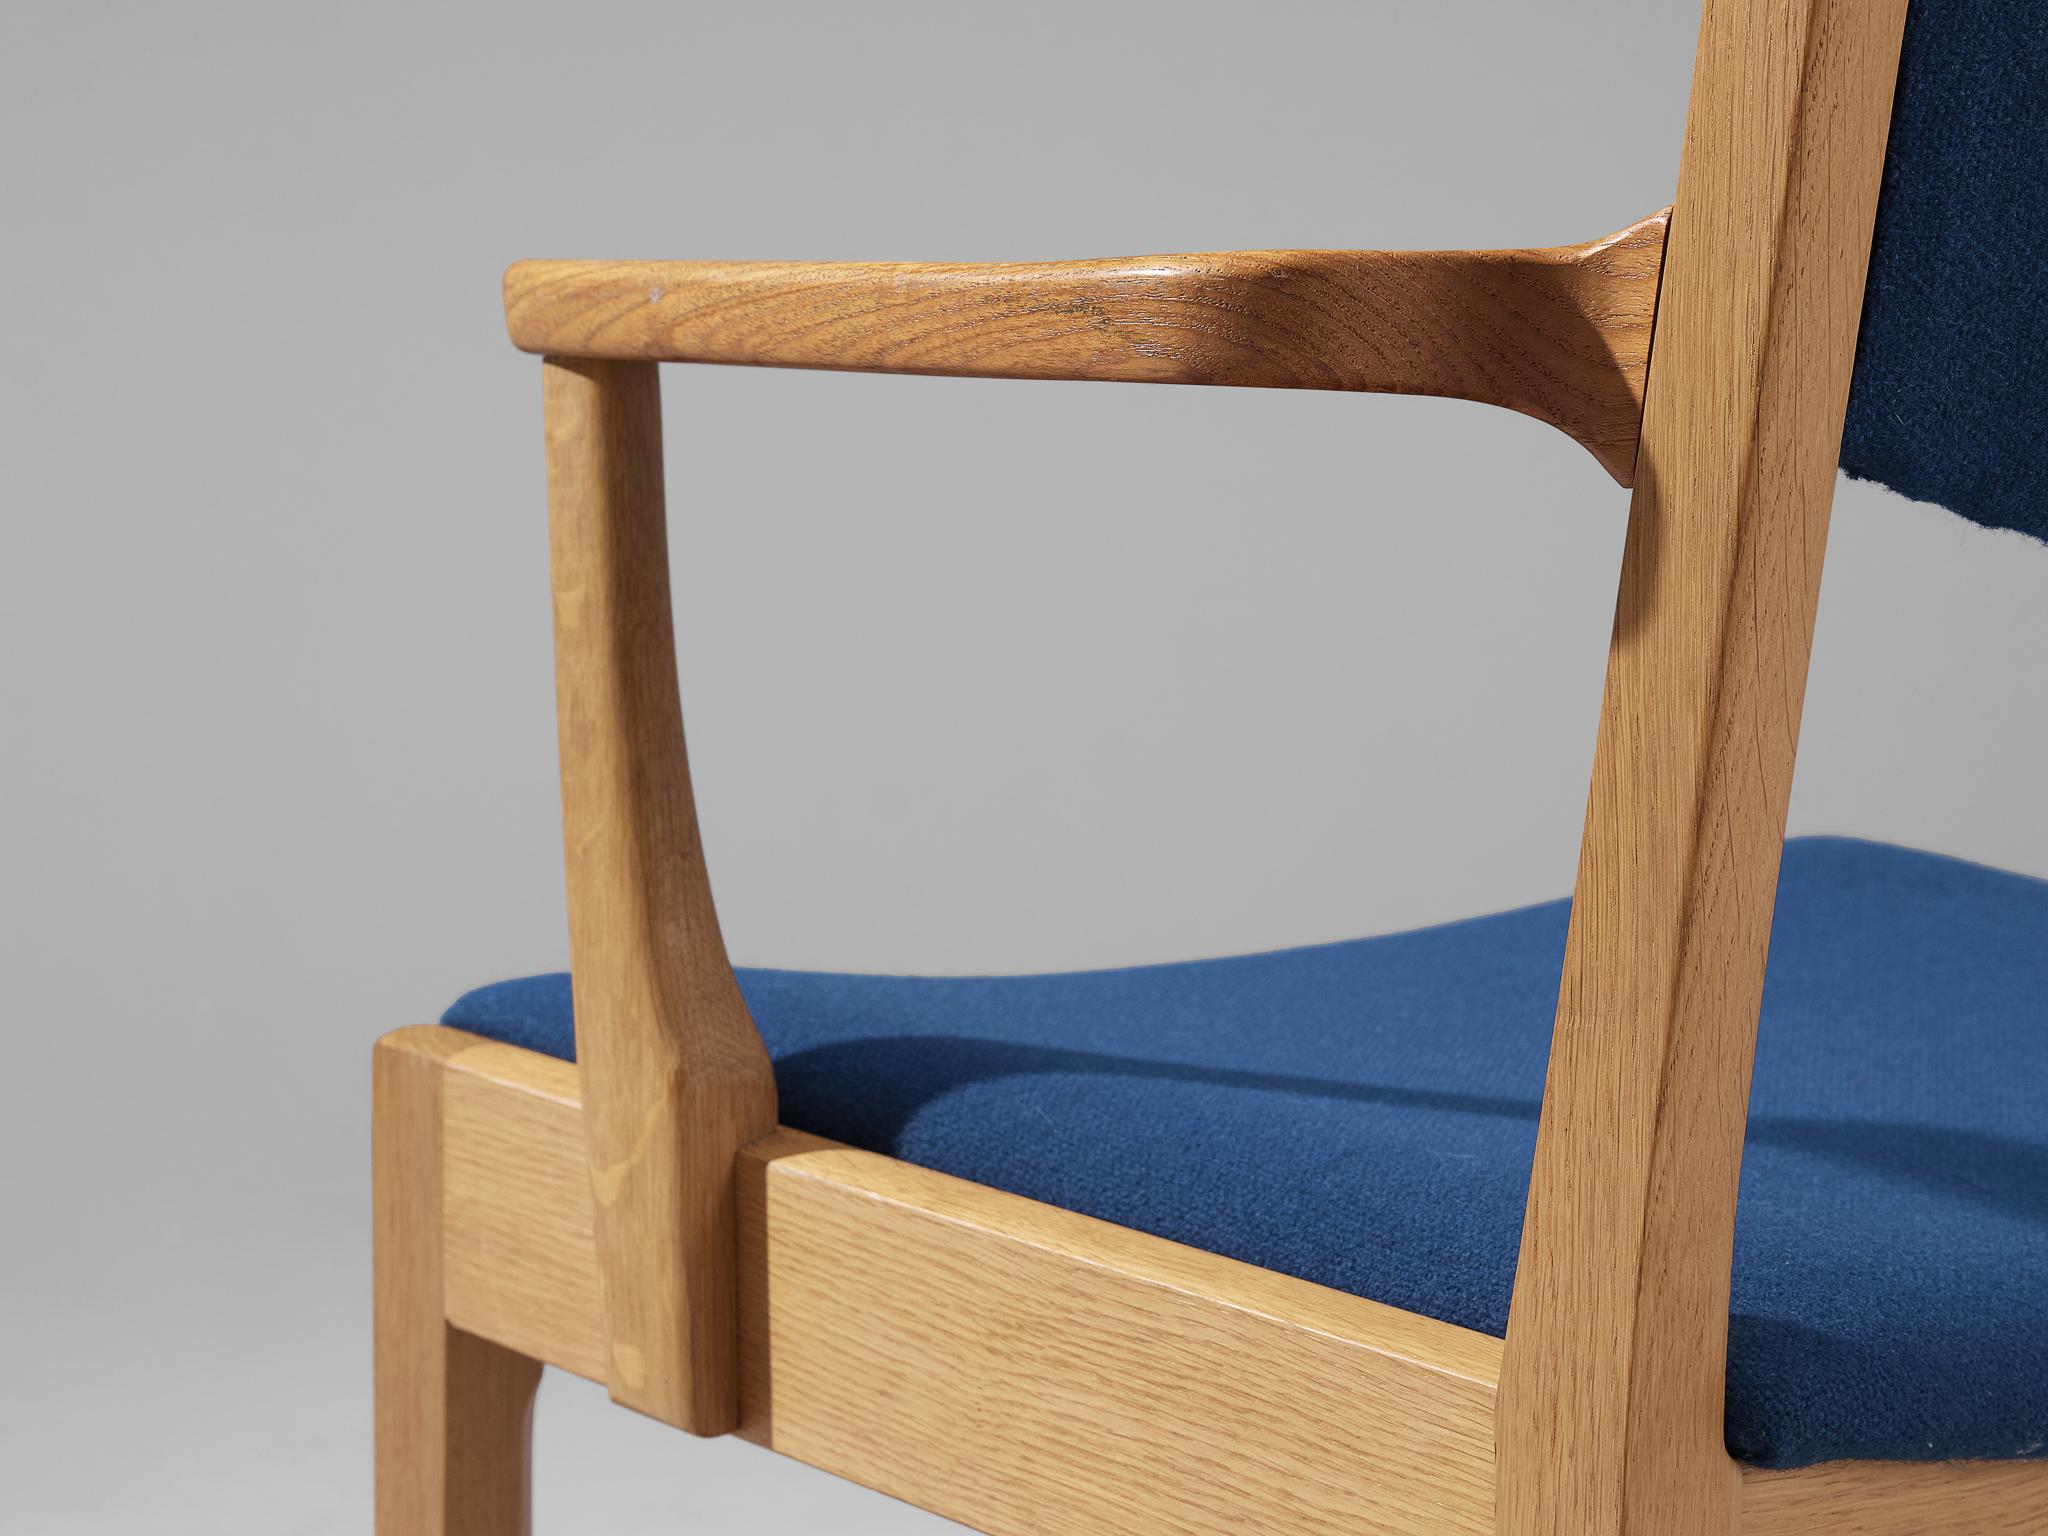 Pair of Danish Armchairs in Oak, Teak and Blue Upholstery For Sale 2